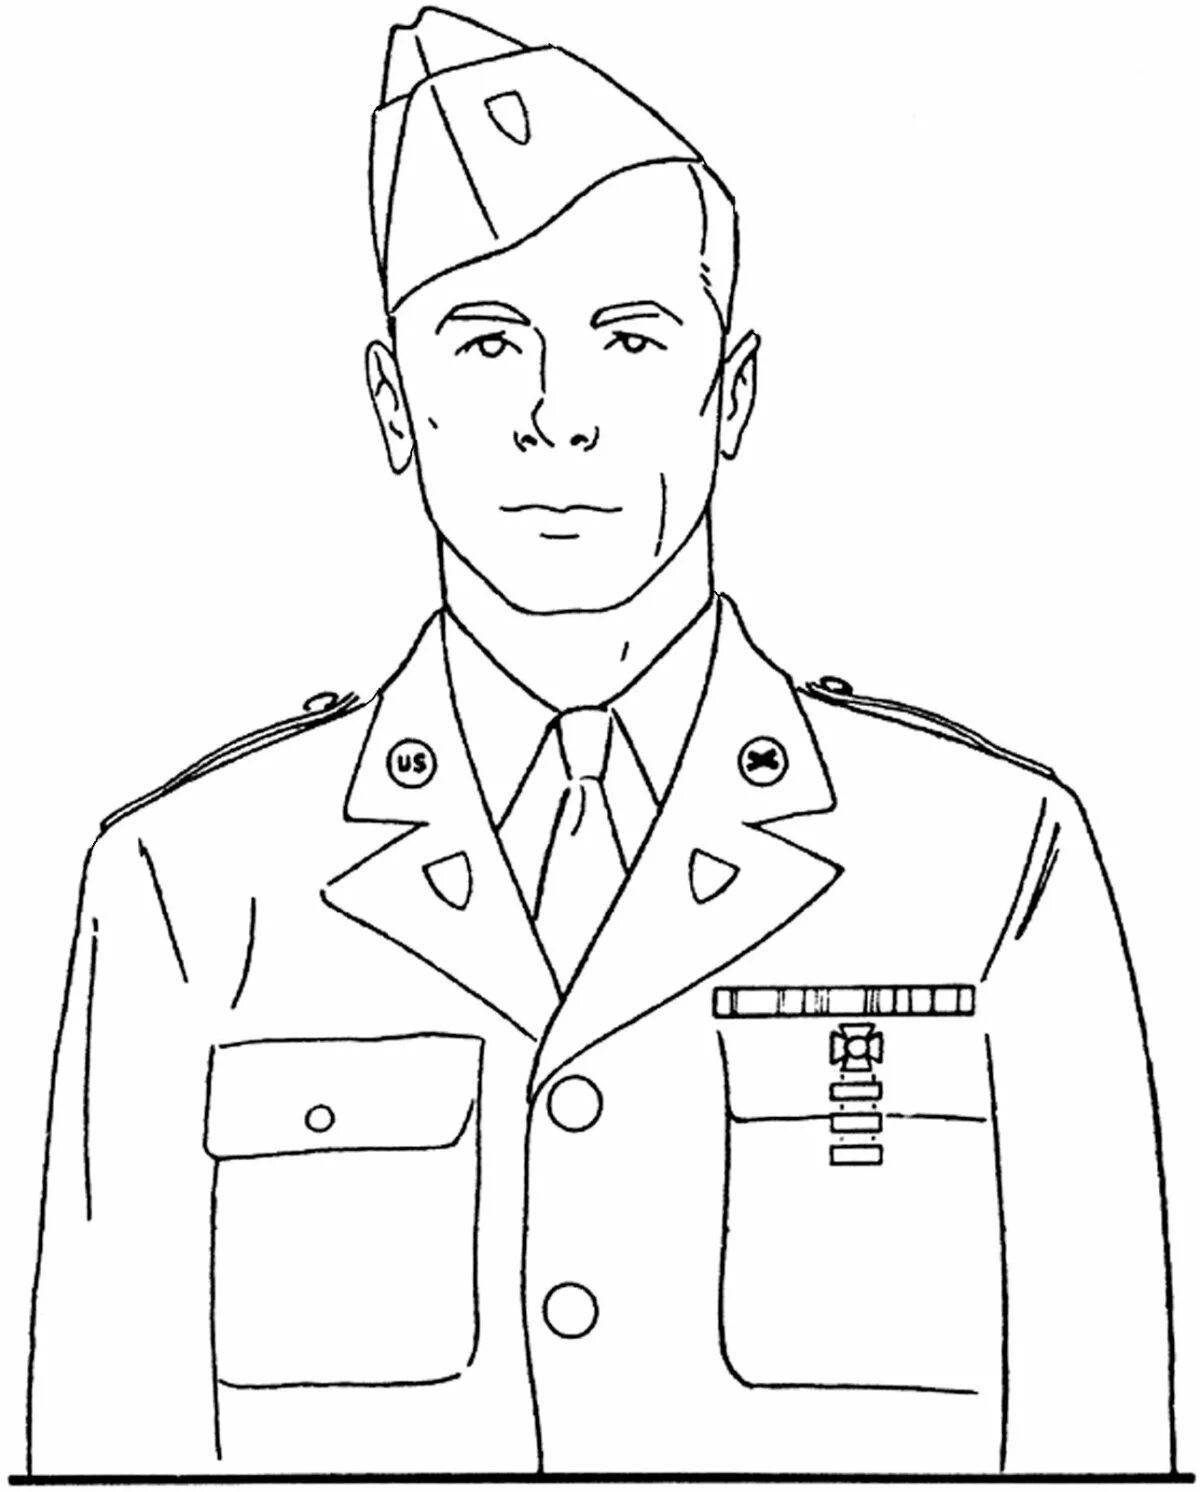 Entertaining soldier face coloring page for kids